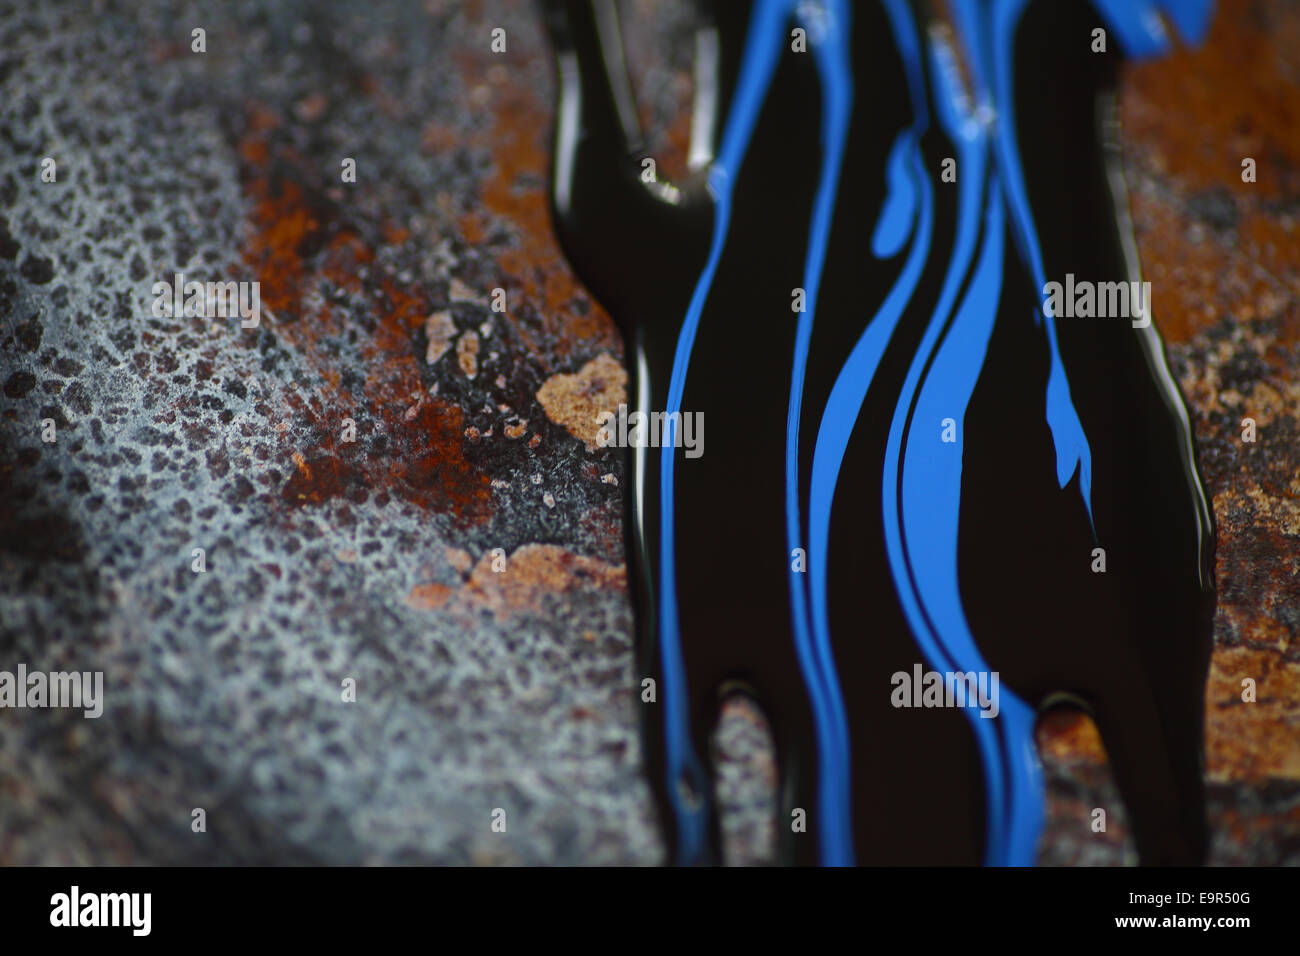 Blue and black paint on a rusted metal surface Stock Photo